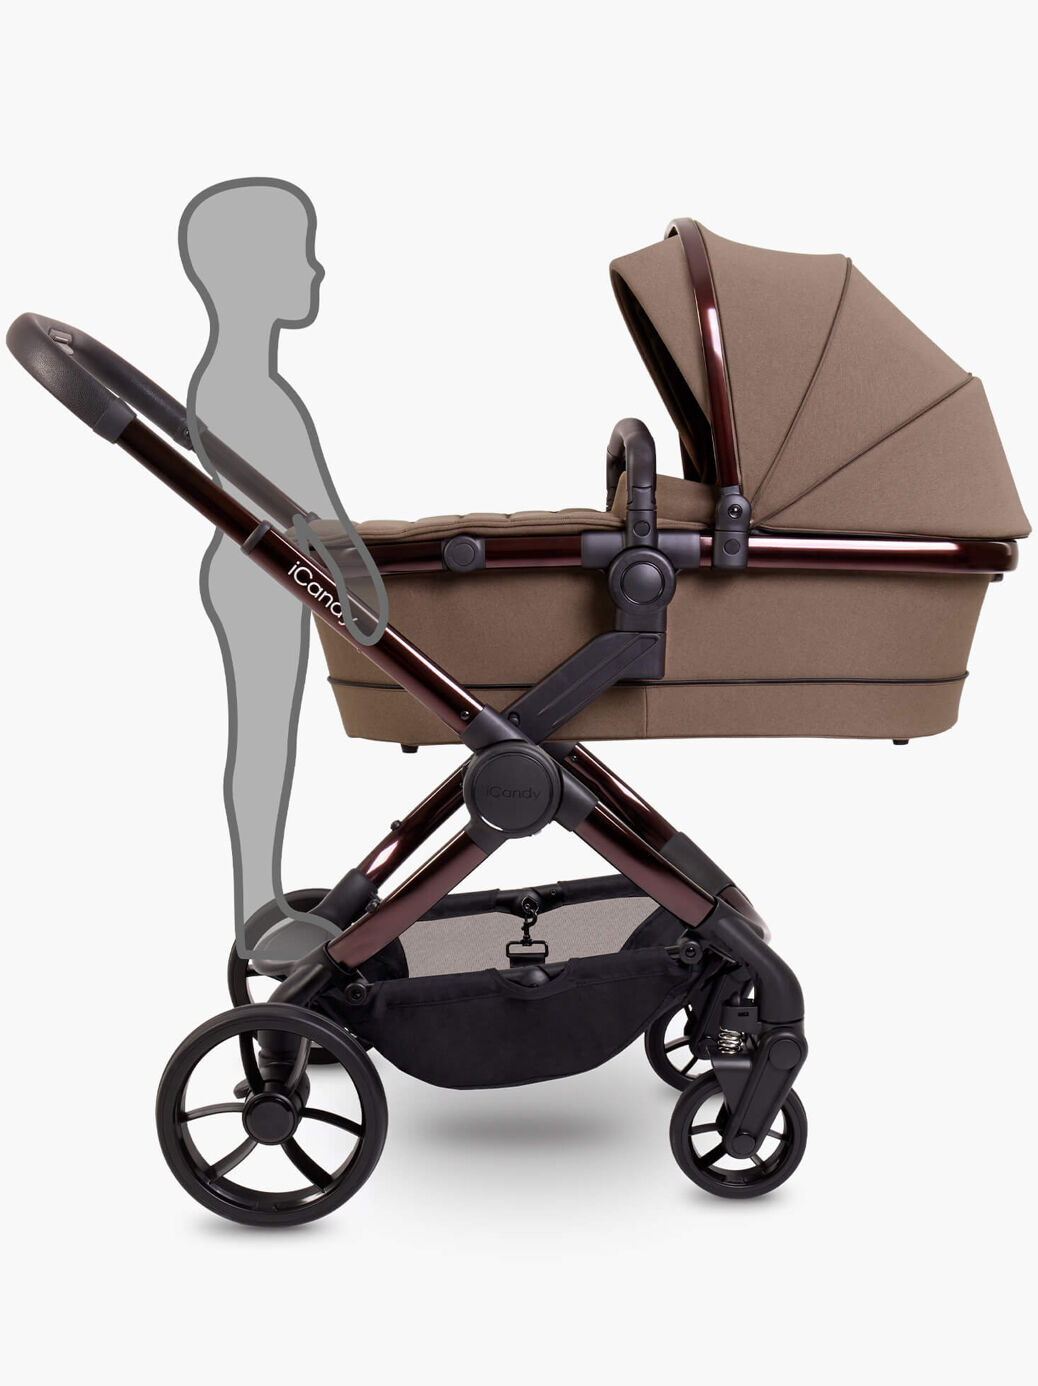 iCandy Peach 7 Pushchair and Carrycot Complete Bundle | Coco